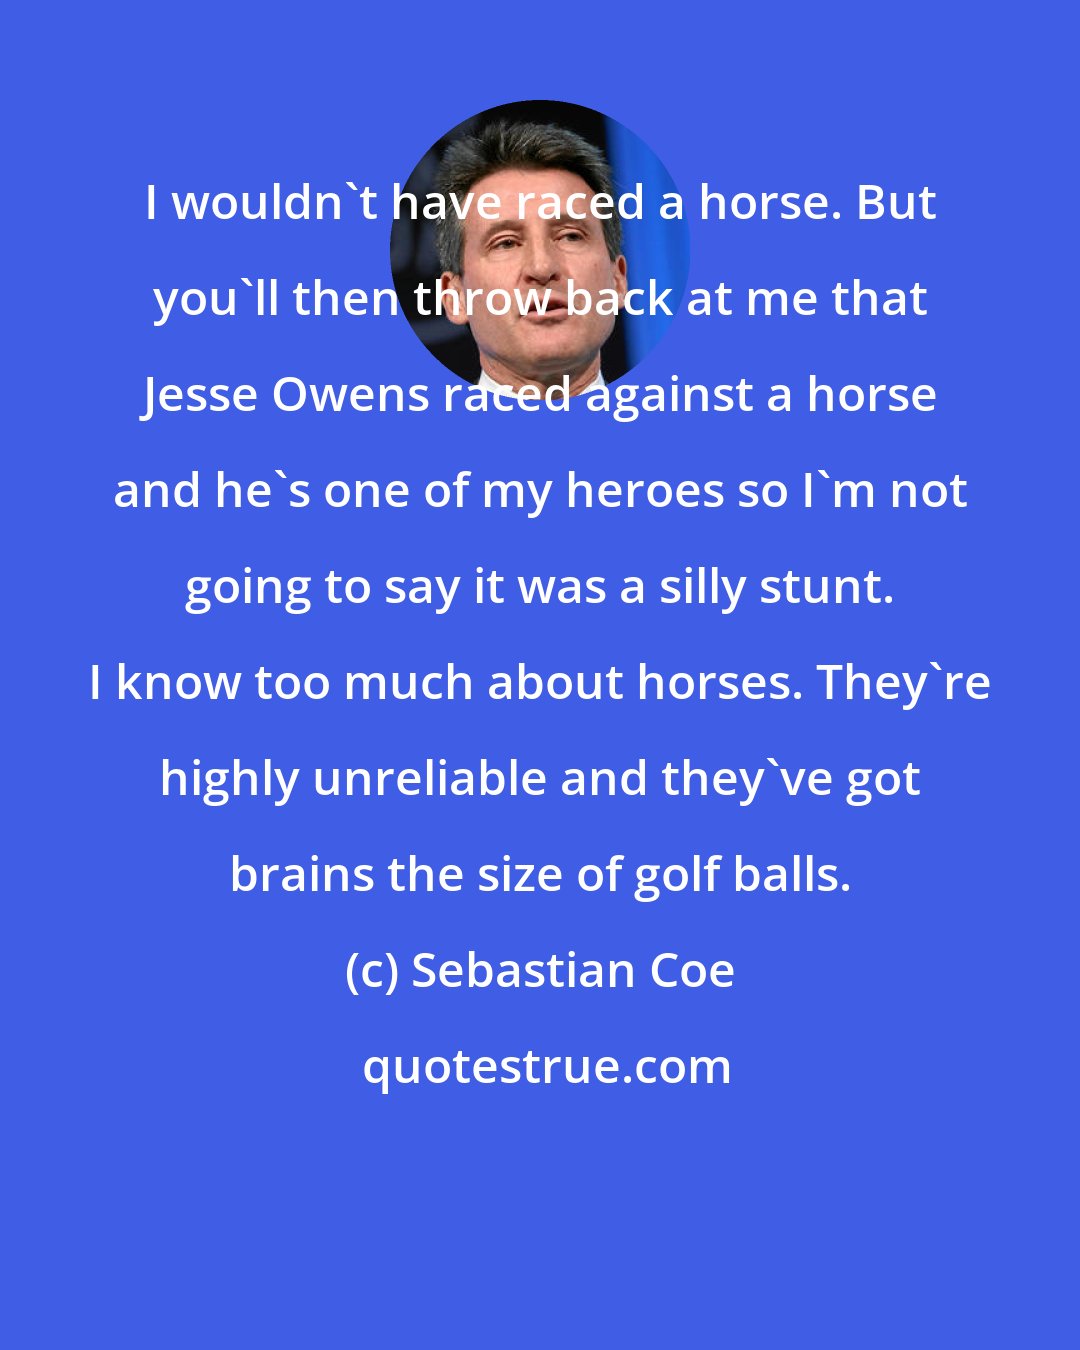 Sebastian Coe: I wouldn't have raced a horse. But you'll then throw back at me that Jesse Owens raced against a horse and he's one of my heroes so I'm not going to say it was a silly stunt. I know too much about horses. They're highly unreliable and they've got brains the size of golf balls.